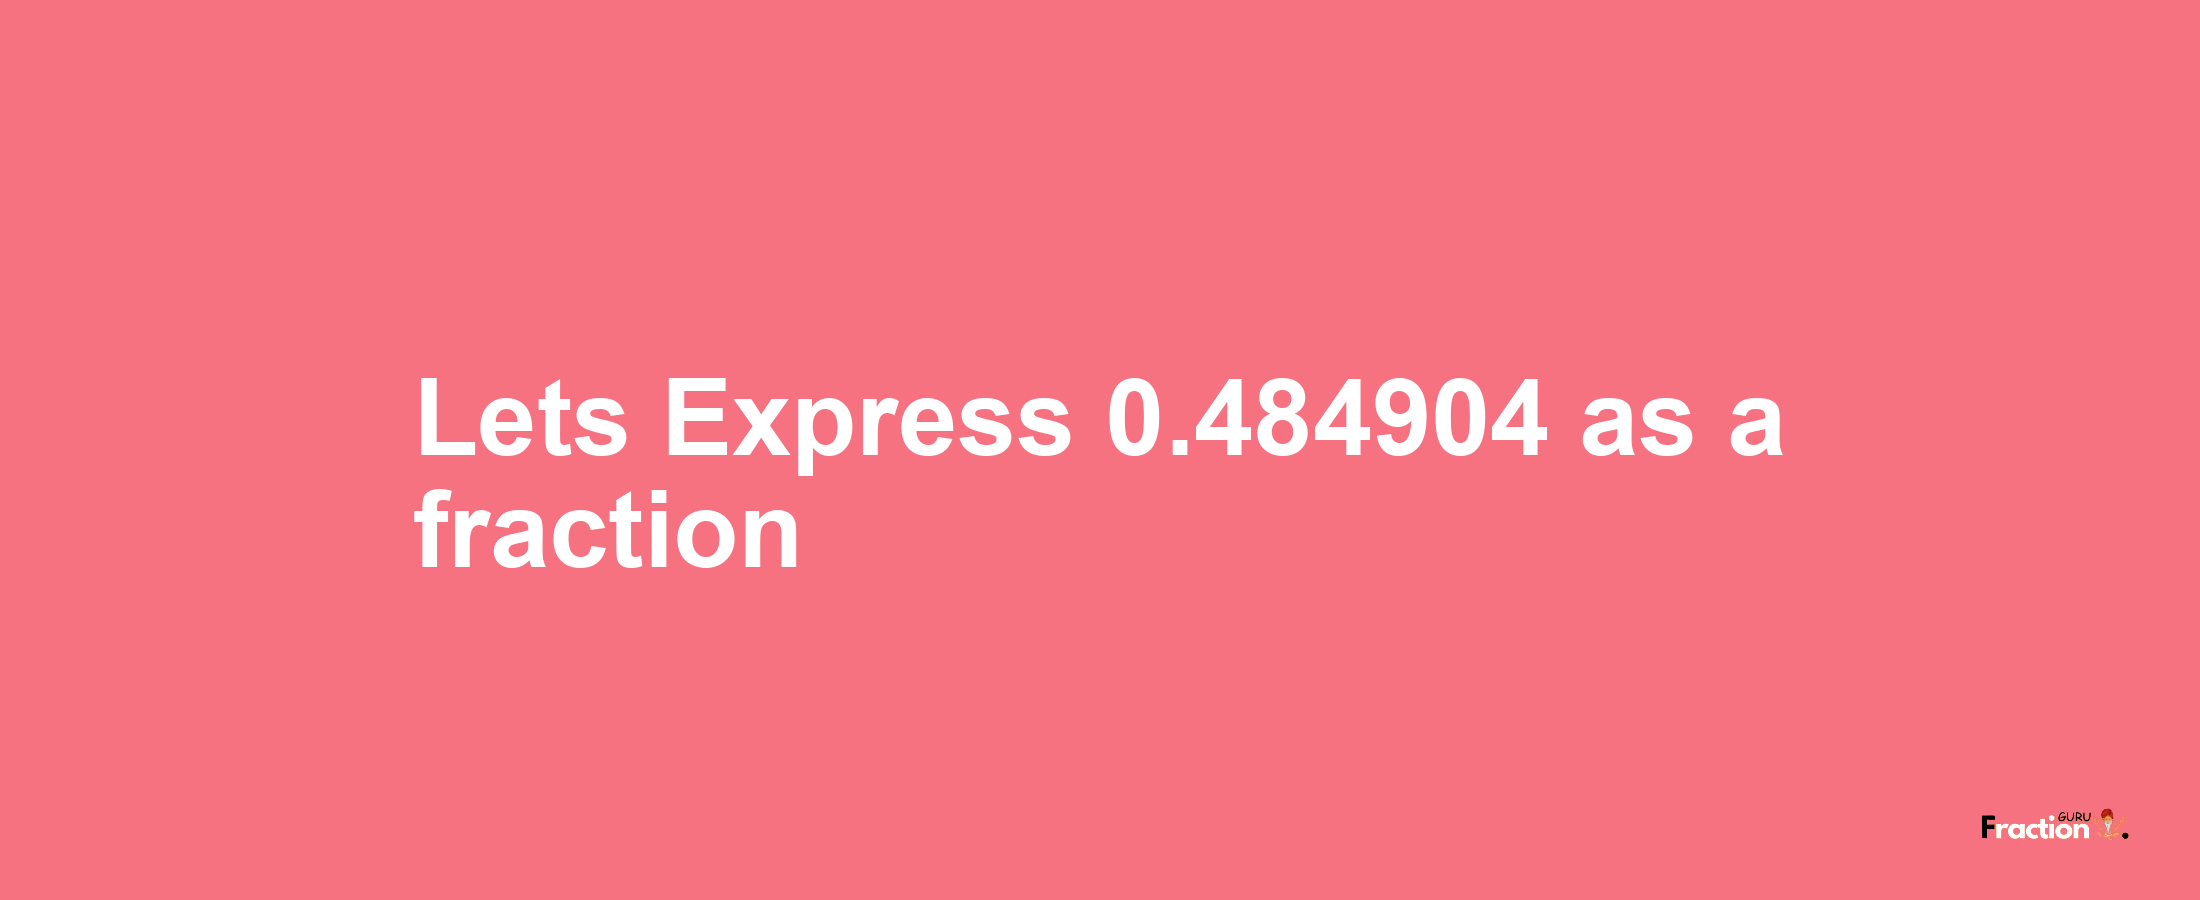 Lets Express 0.484904 as afraction